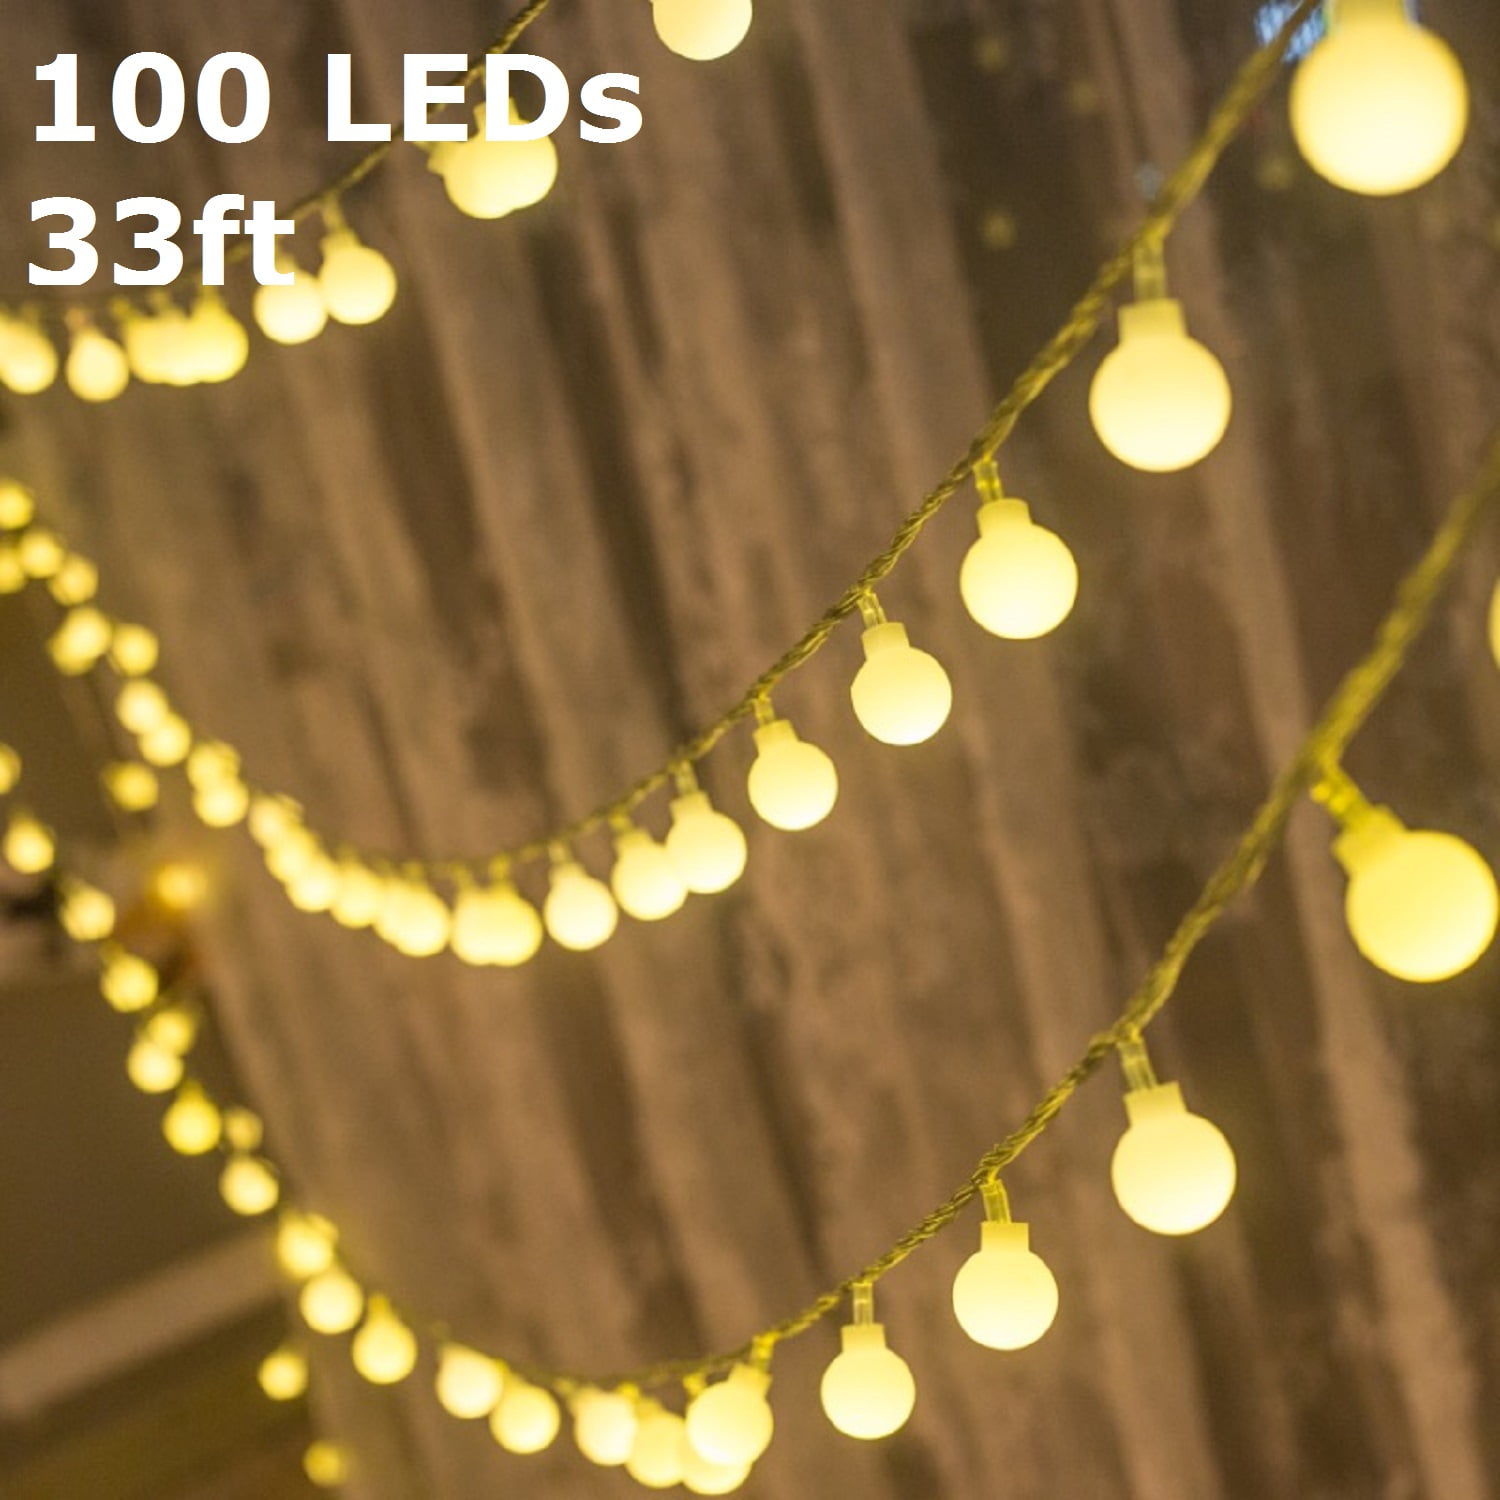 10 LED String Lights bulbs Globe Warm White Indoor Outdoor Gardens Party Decor 